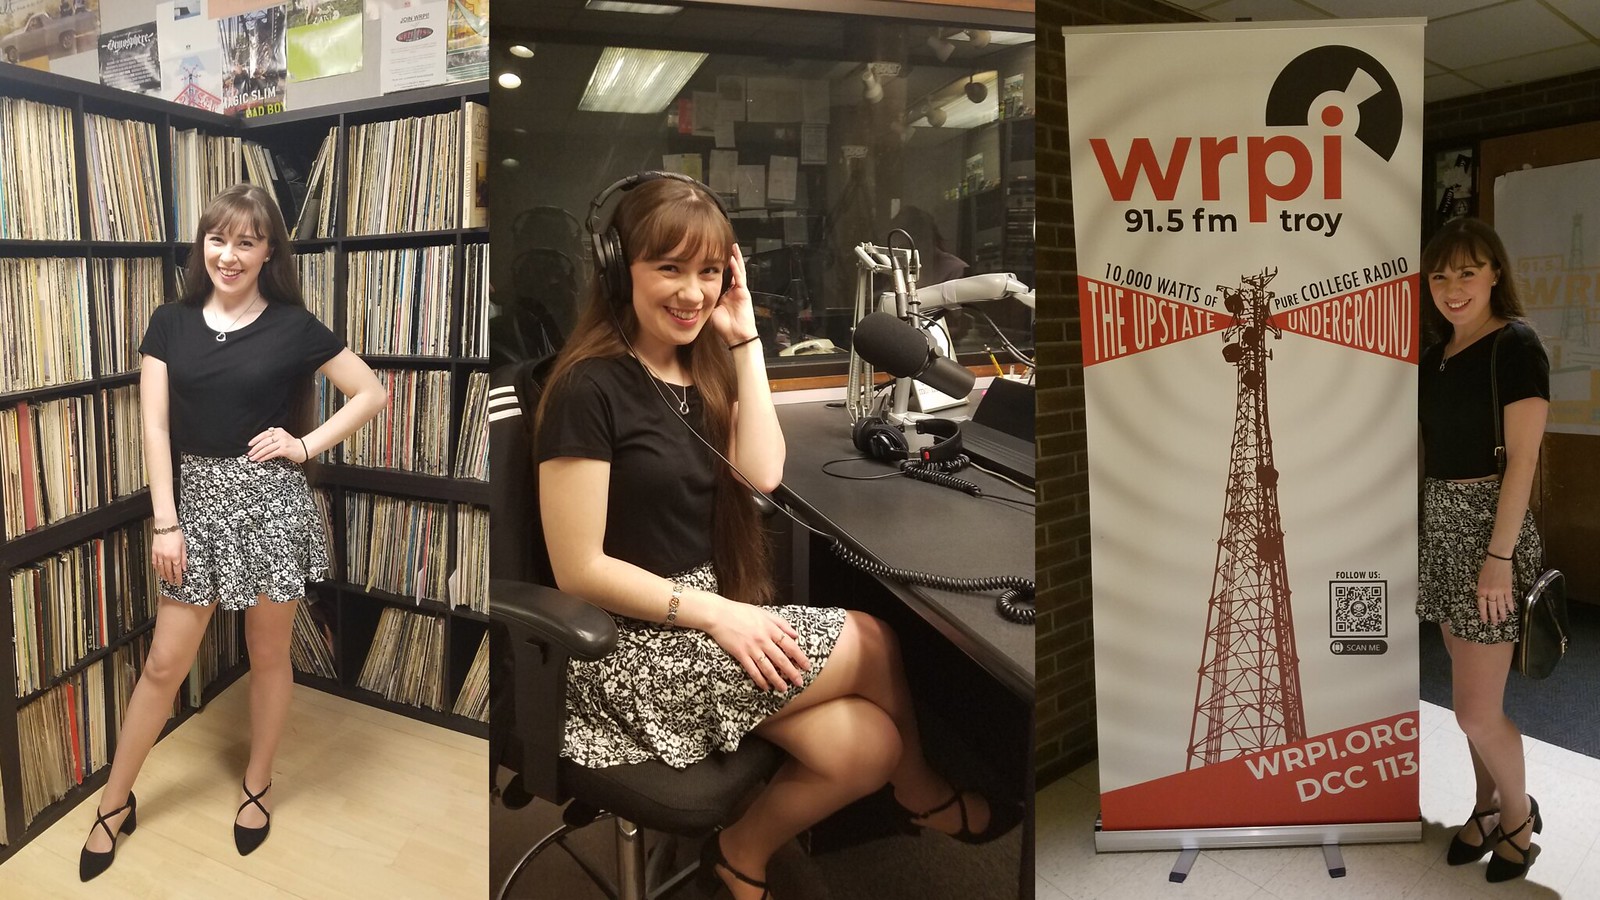 Kristina Lachaga stopped by WRPI for an In-Studio Interview - Listen to the replay!